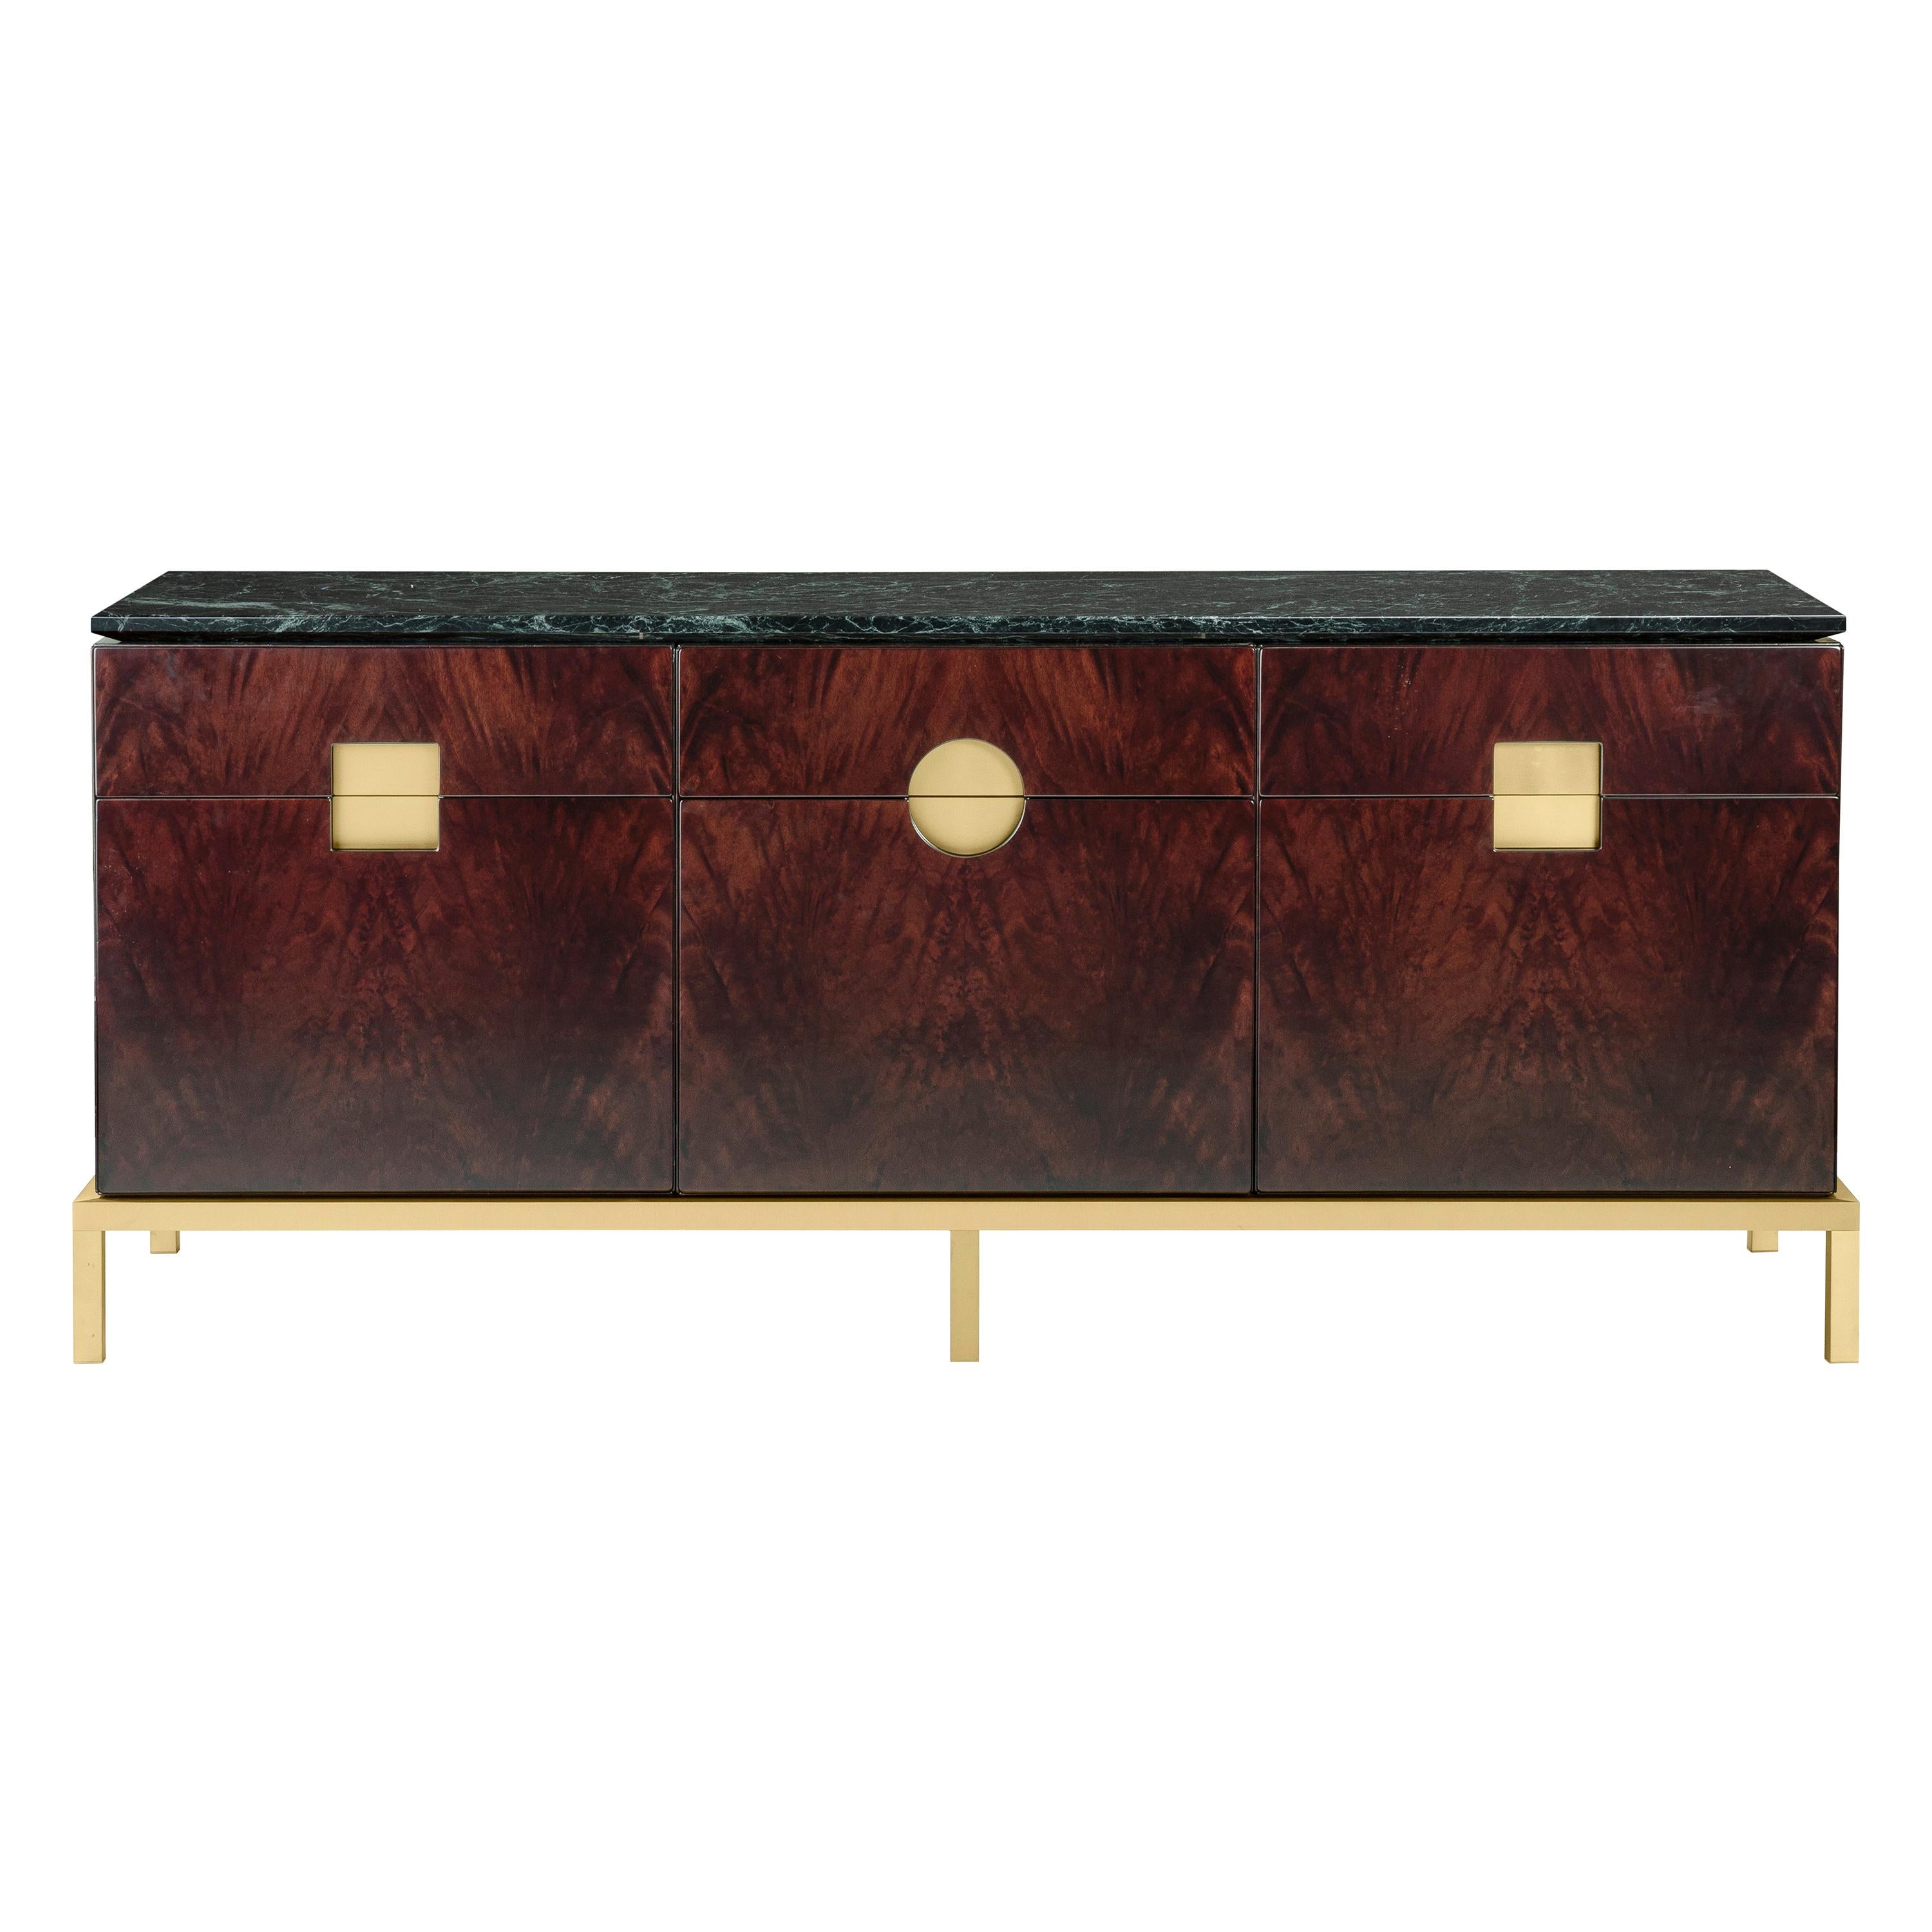 Zuan Dining Cabinet in Satin Brass Legs with Mahogany Wood by Paolo Rizzatto